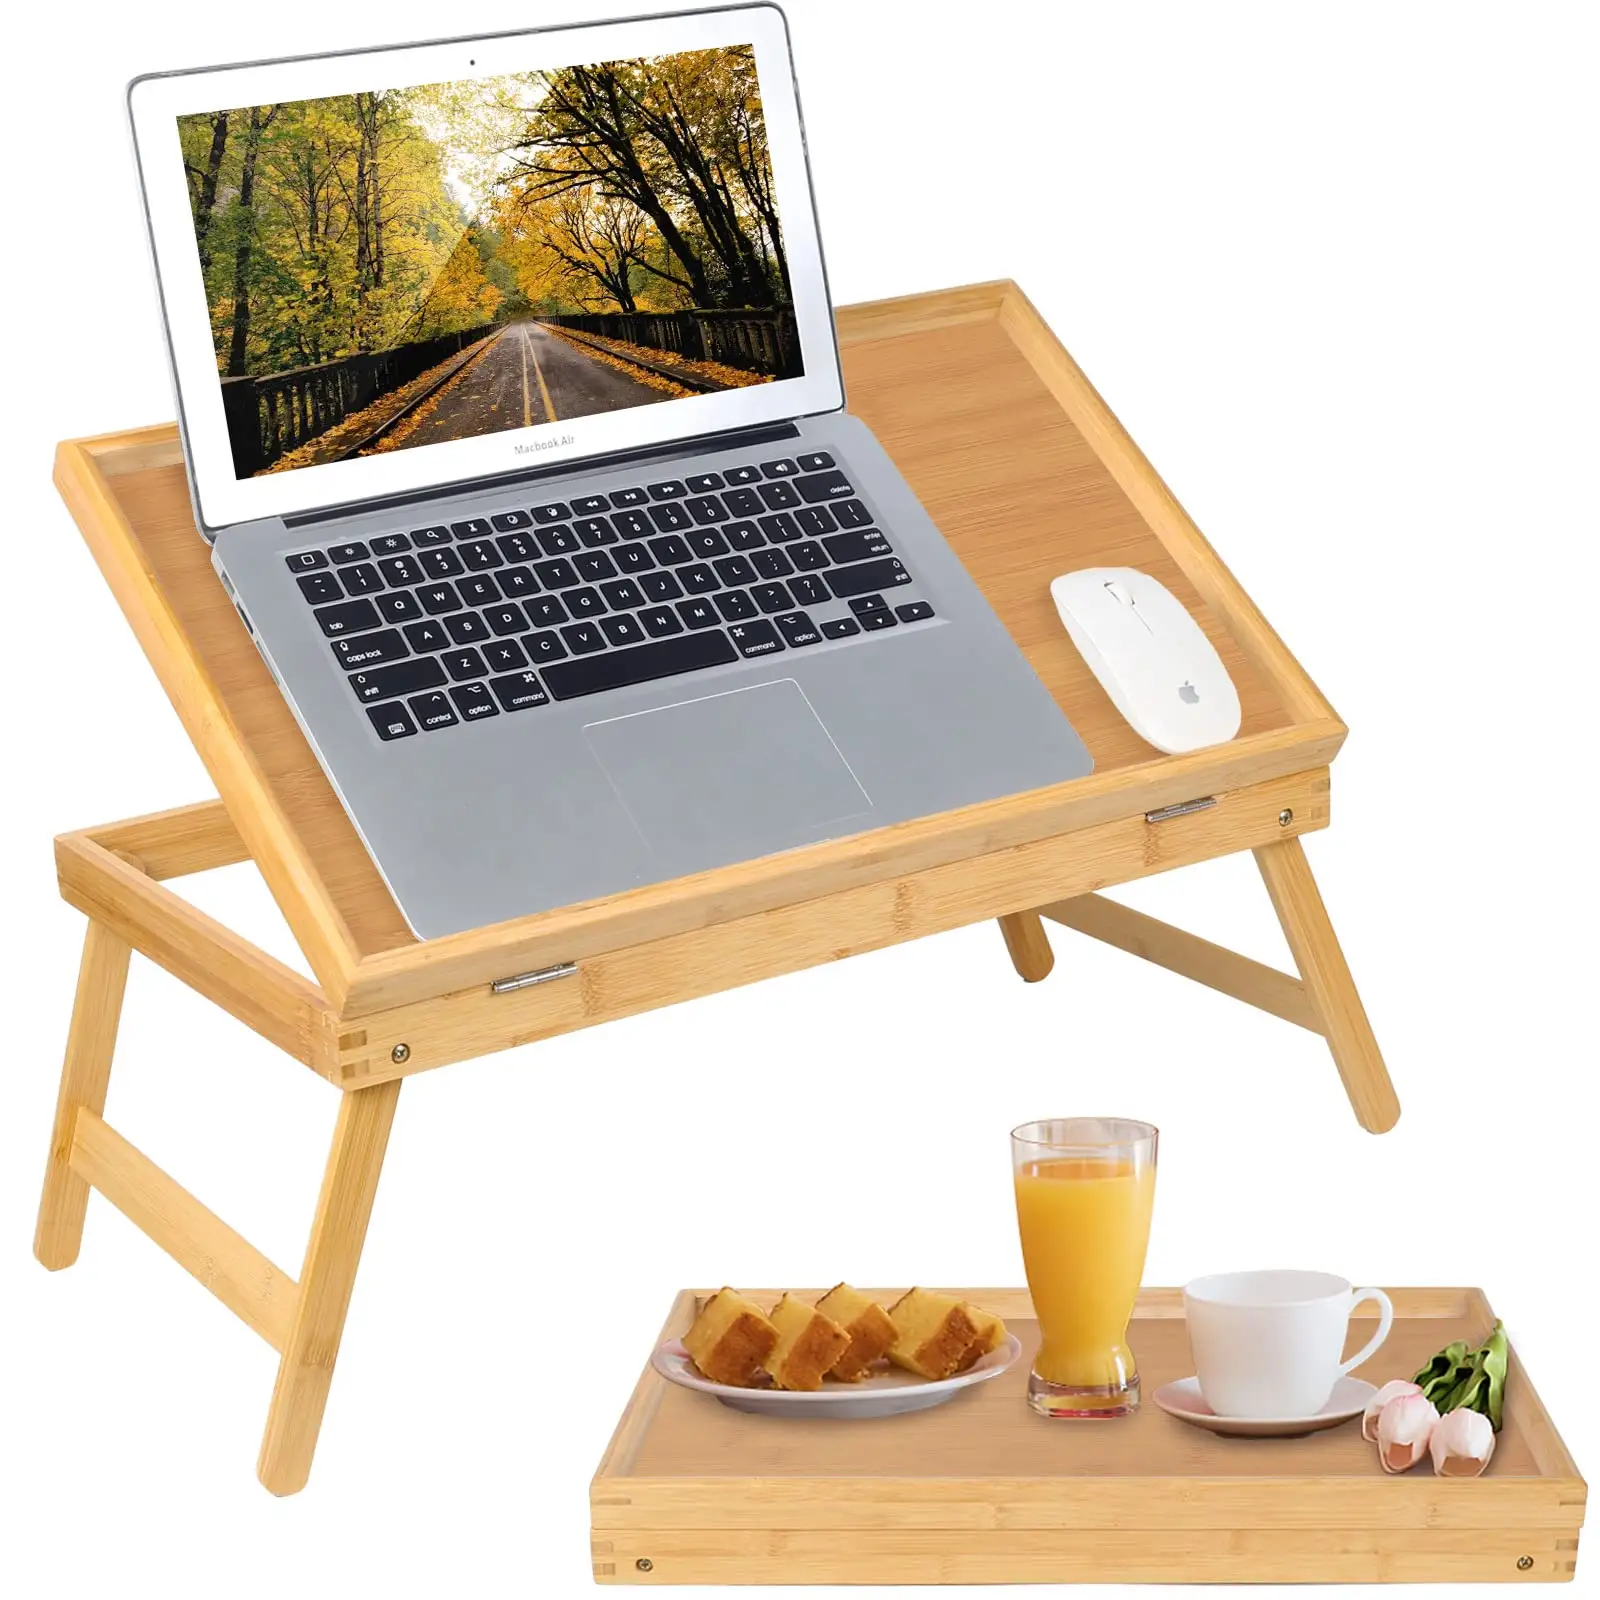 Bed Table Wooden Laptop Stand With Handles Folding Legs Small Table Bamboo Breakfast Food Tray With Media Slot Table For Laptop